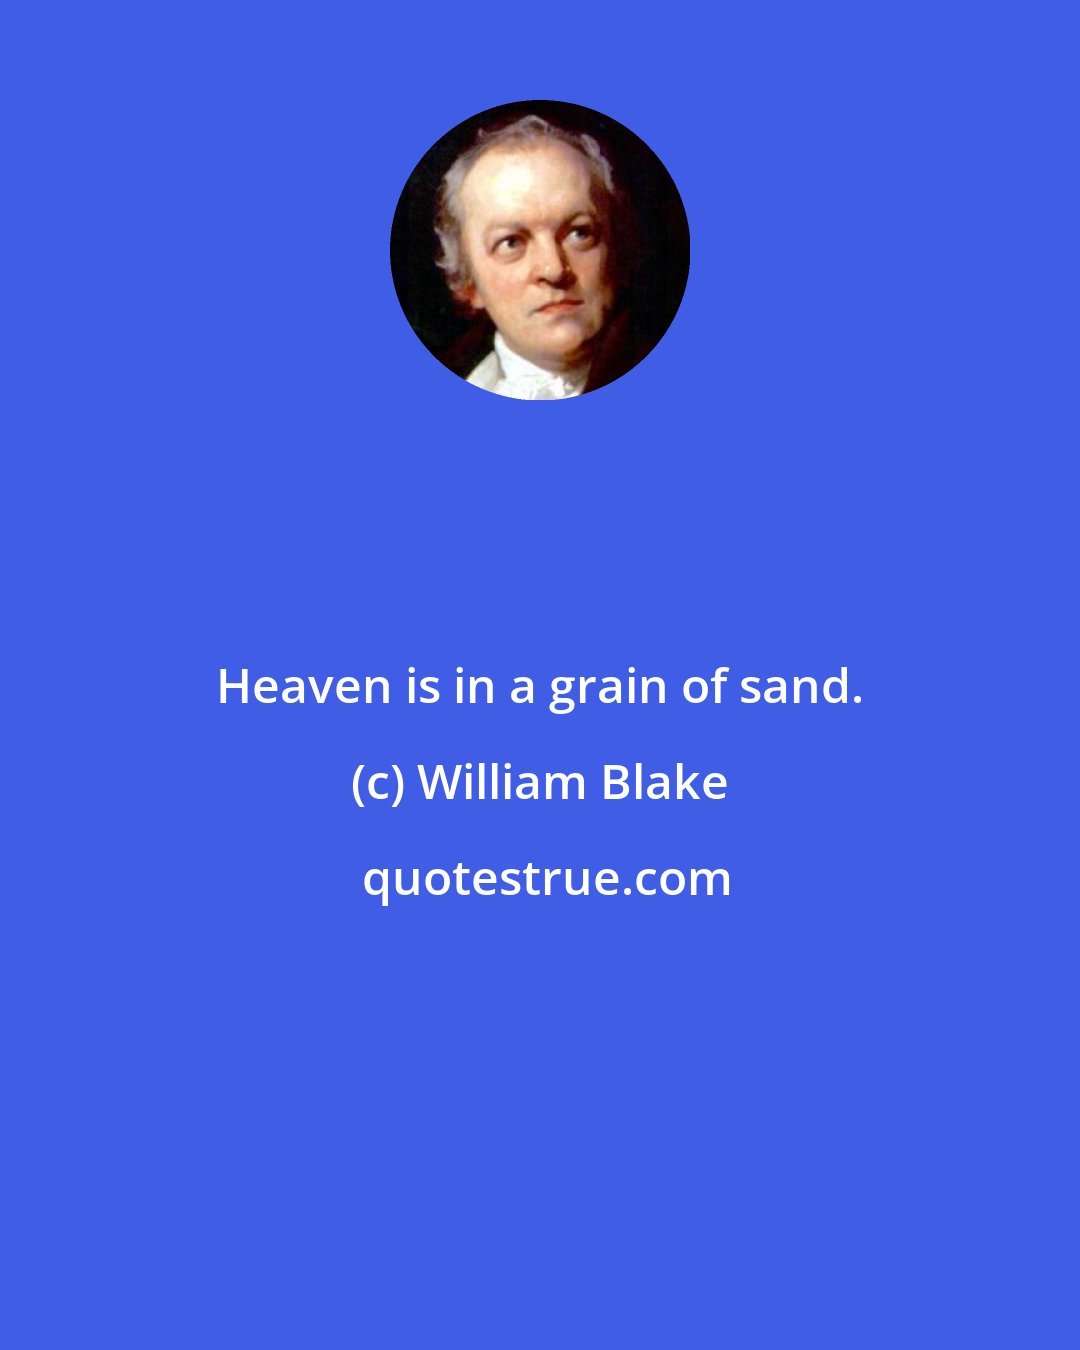 William Blake: Heaven is in a grain of sand.